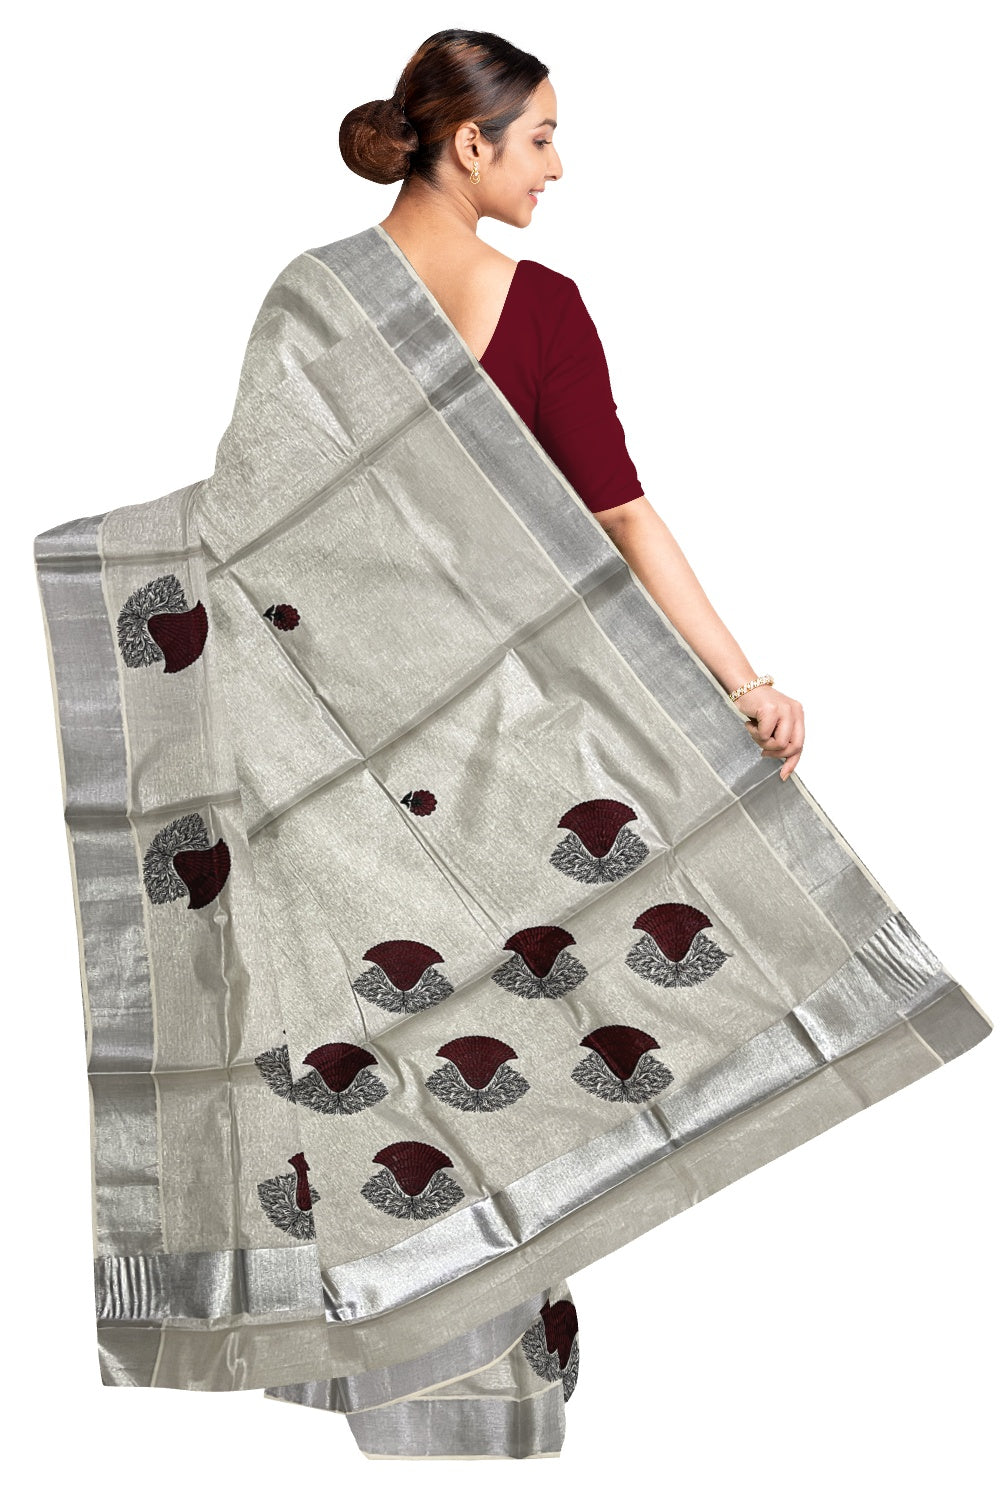 Kerala Silver Tissue Kasavu Saree with Maroon Floral Embroidery Design